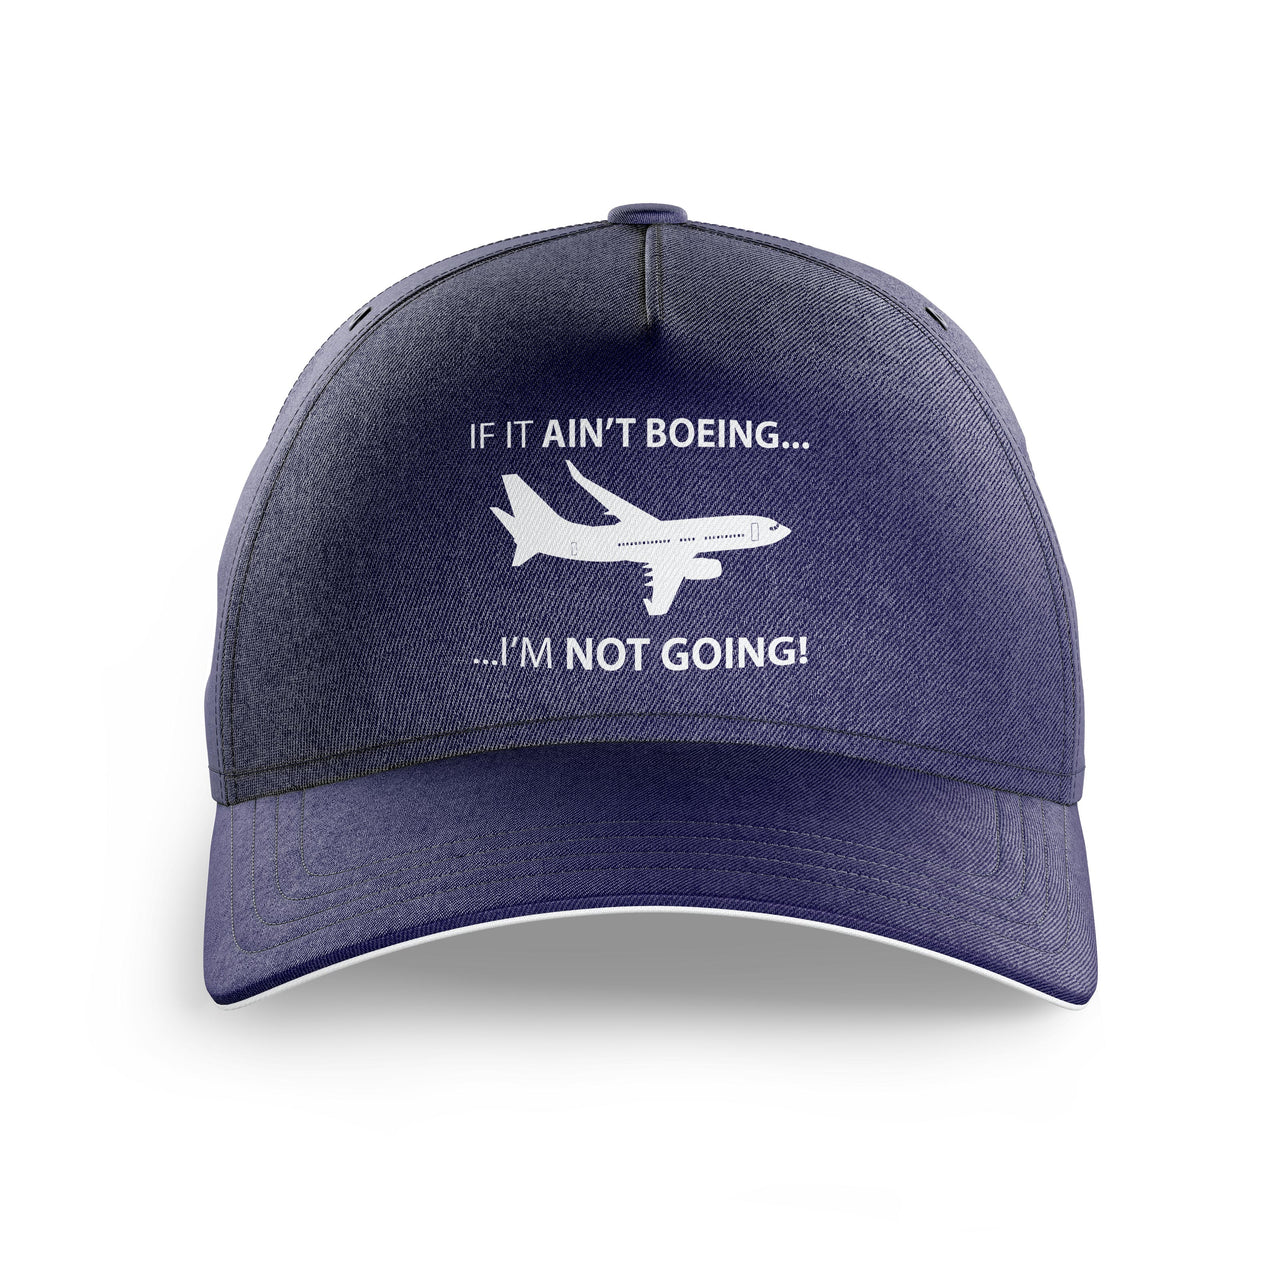 If It Ain't Boeing I'm Not Going! Printed Hats